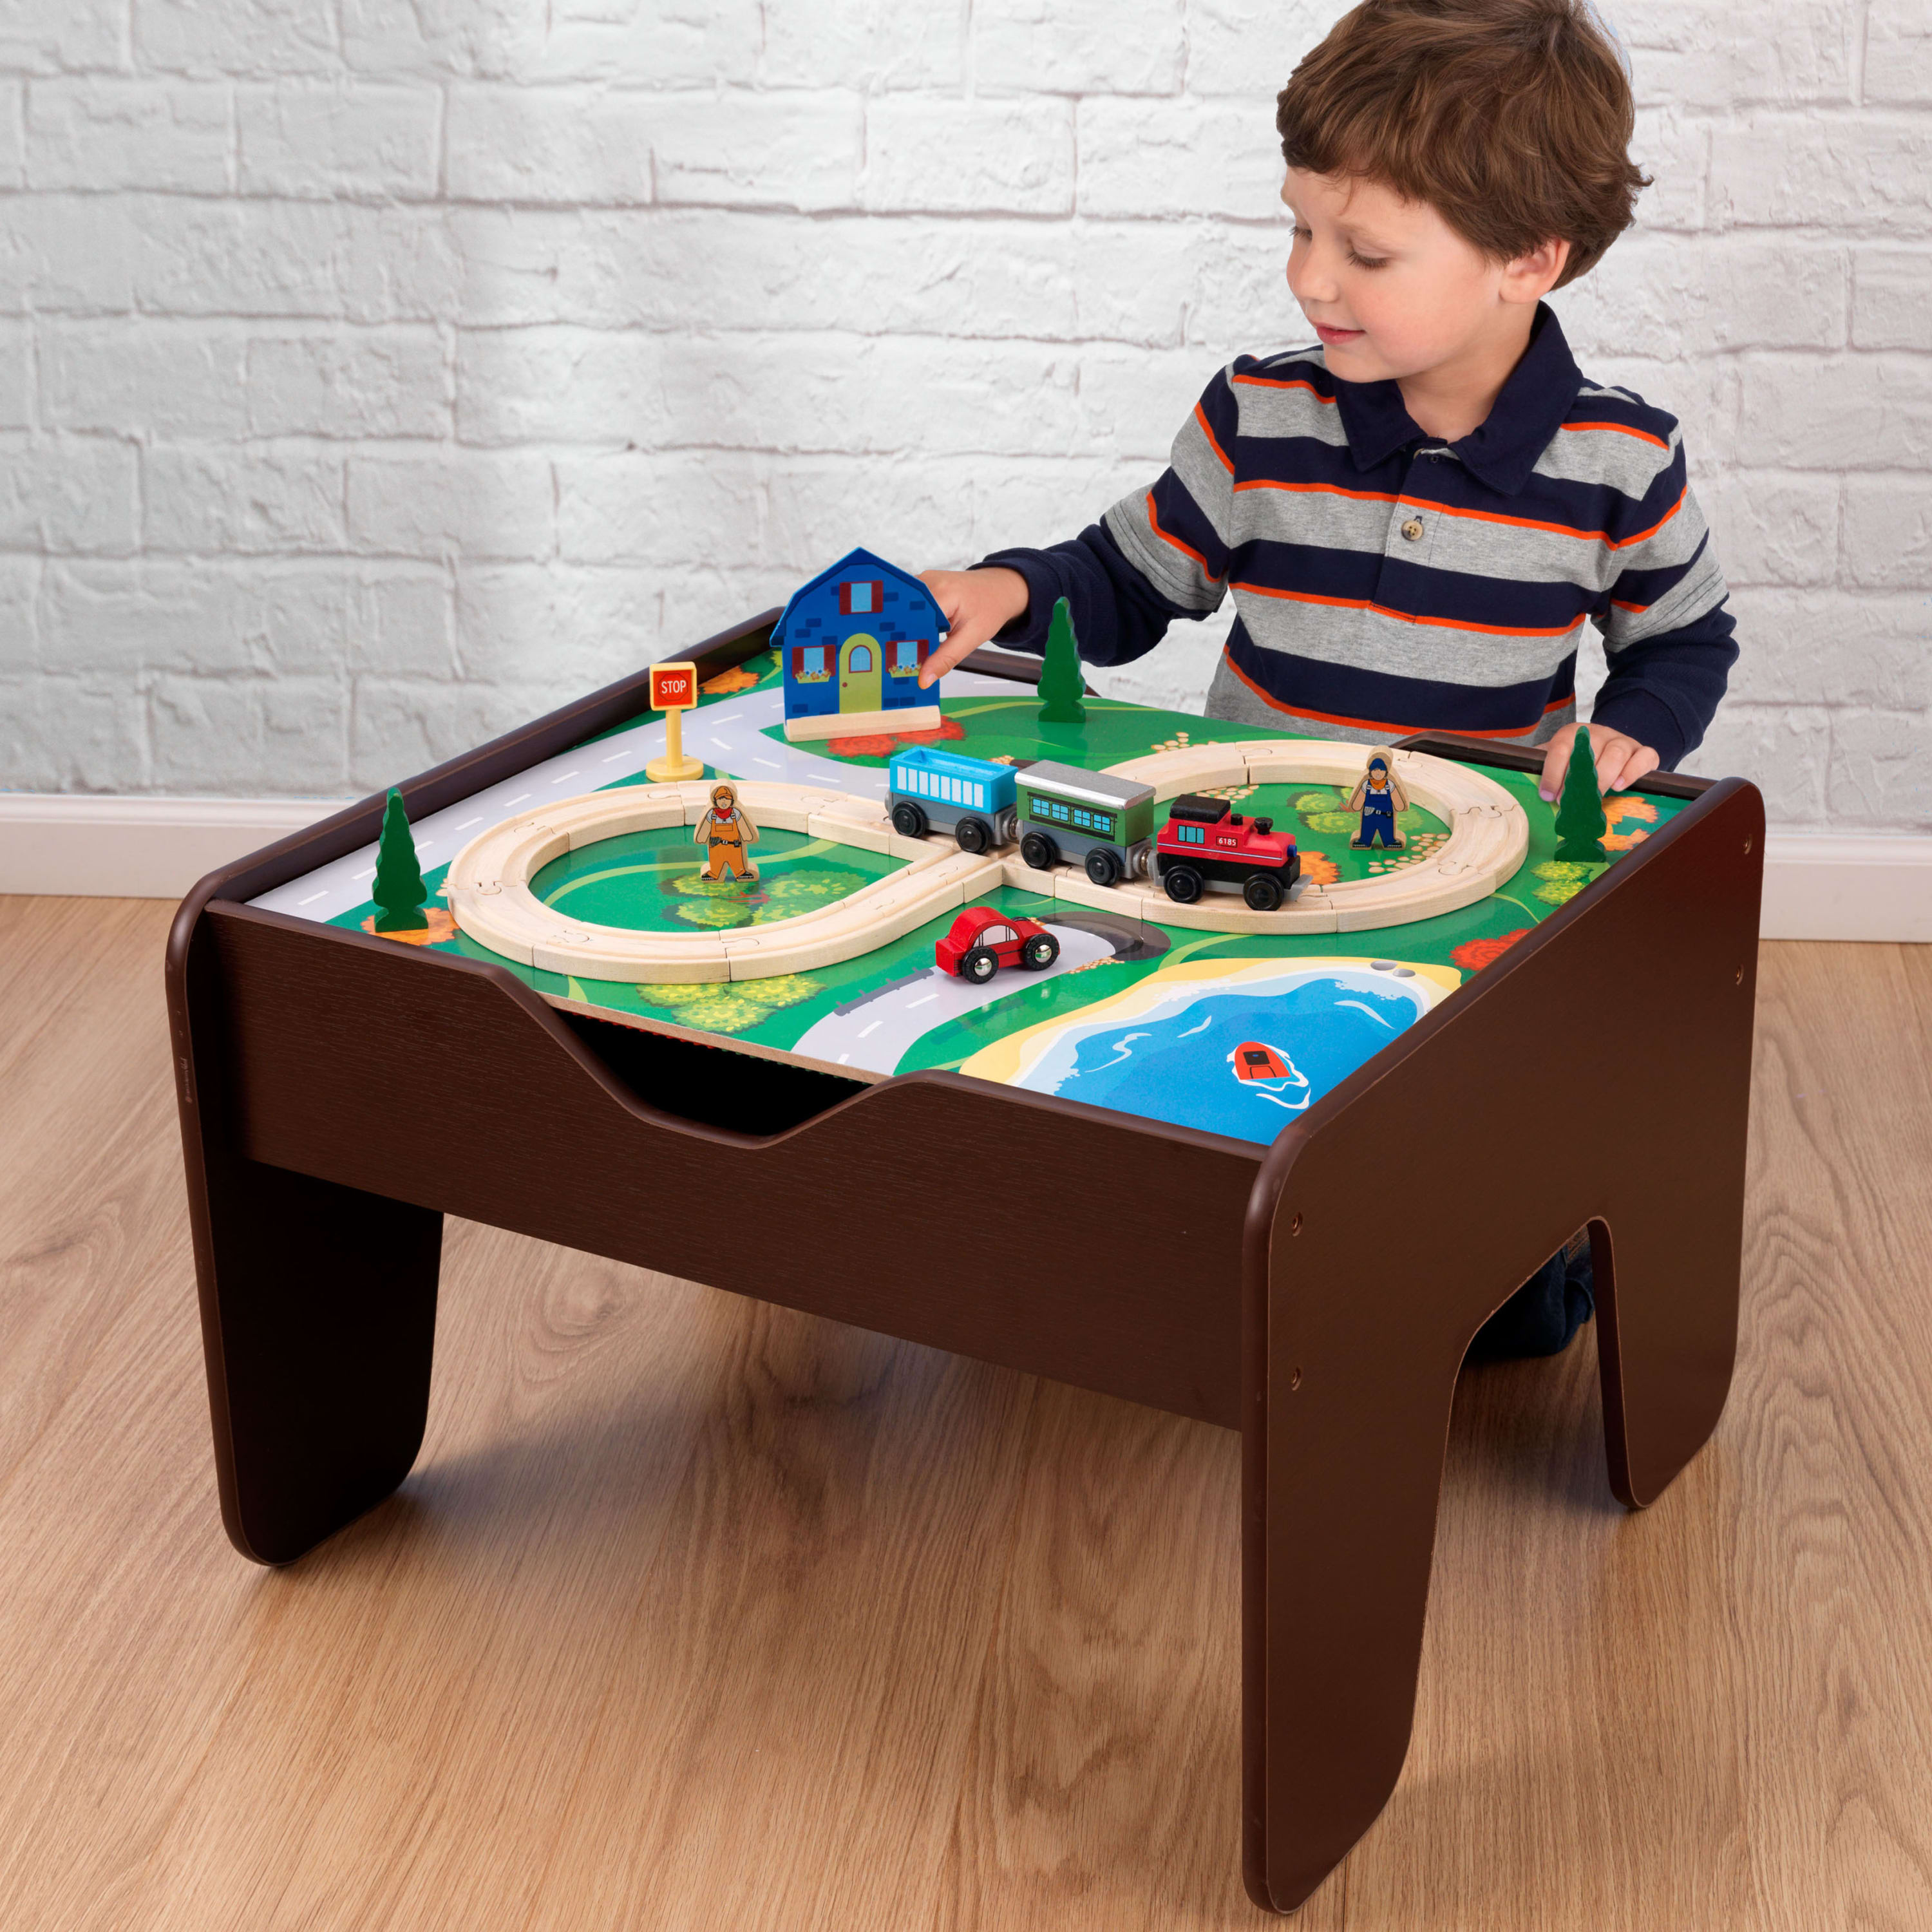 KidKraft Reversible Wooden Activity Table with Board and Train Set, Espresso, For Ages 3+ - image 2 of 9